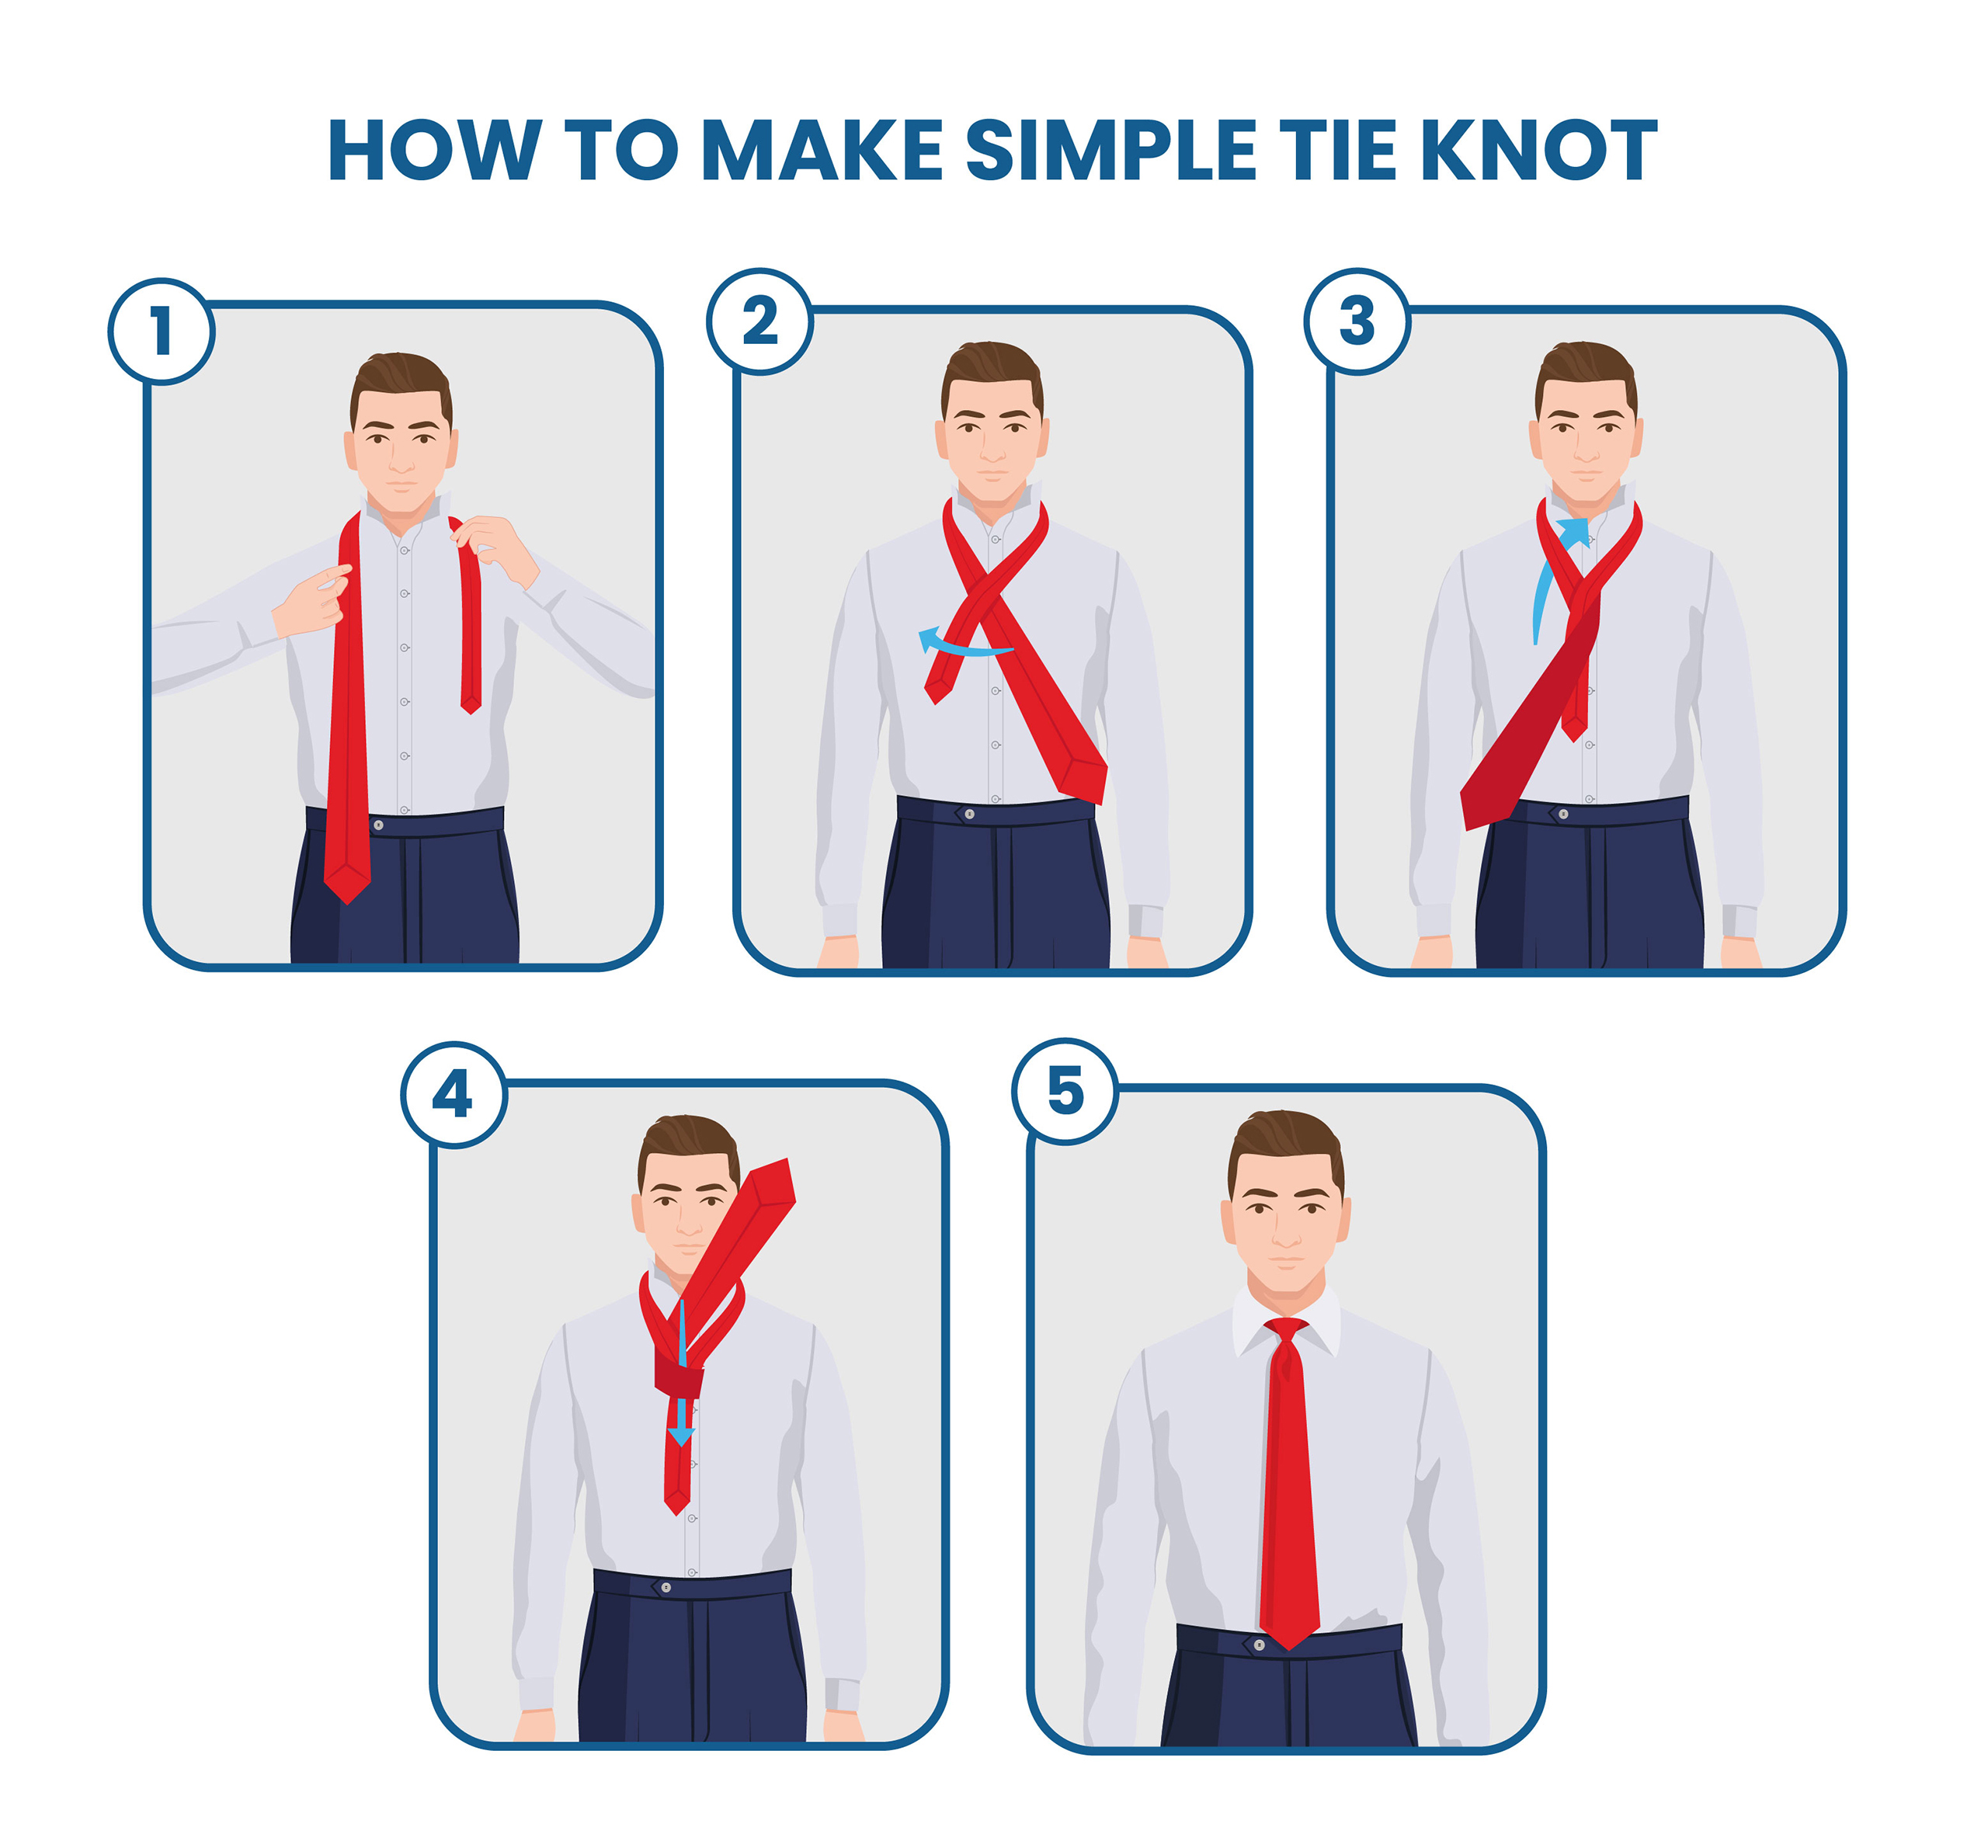 How To Tie A Simple Knot (Oriental Knot)